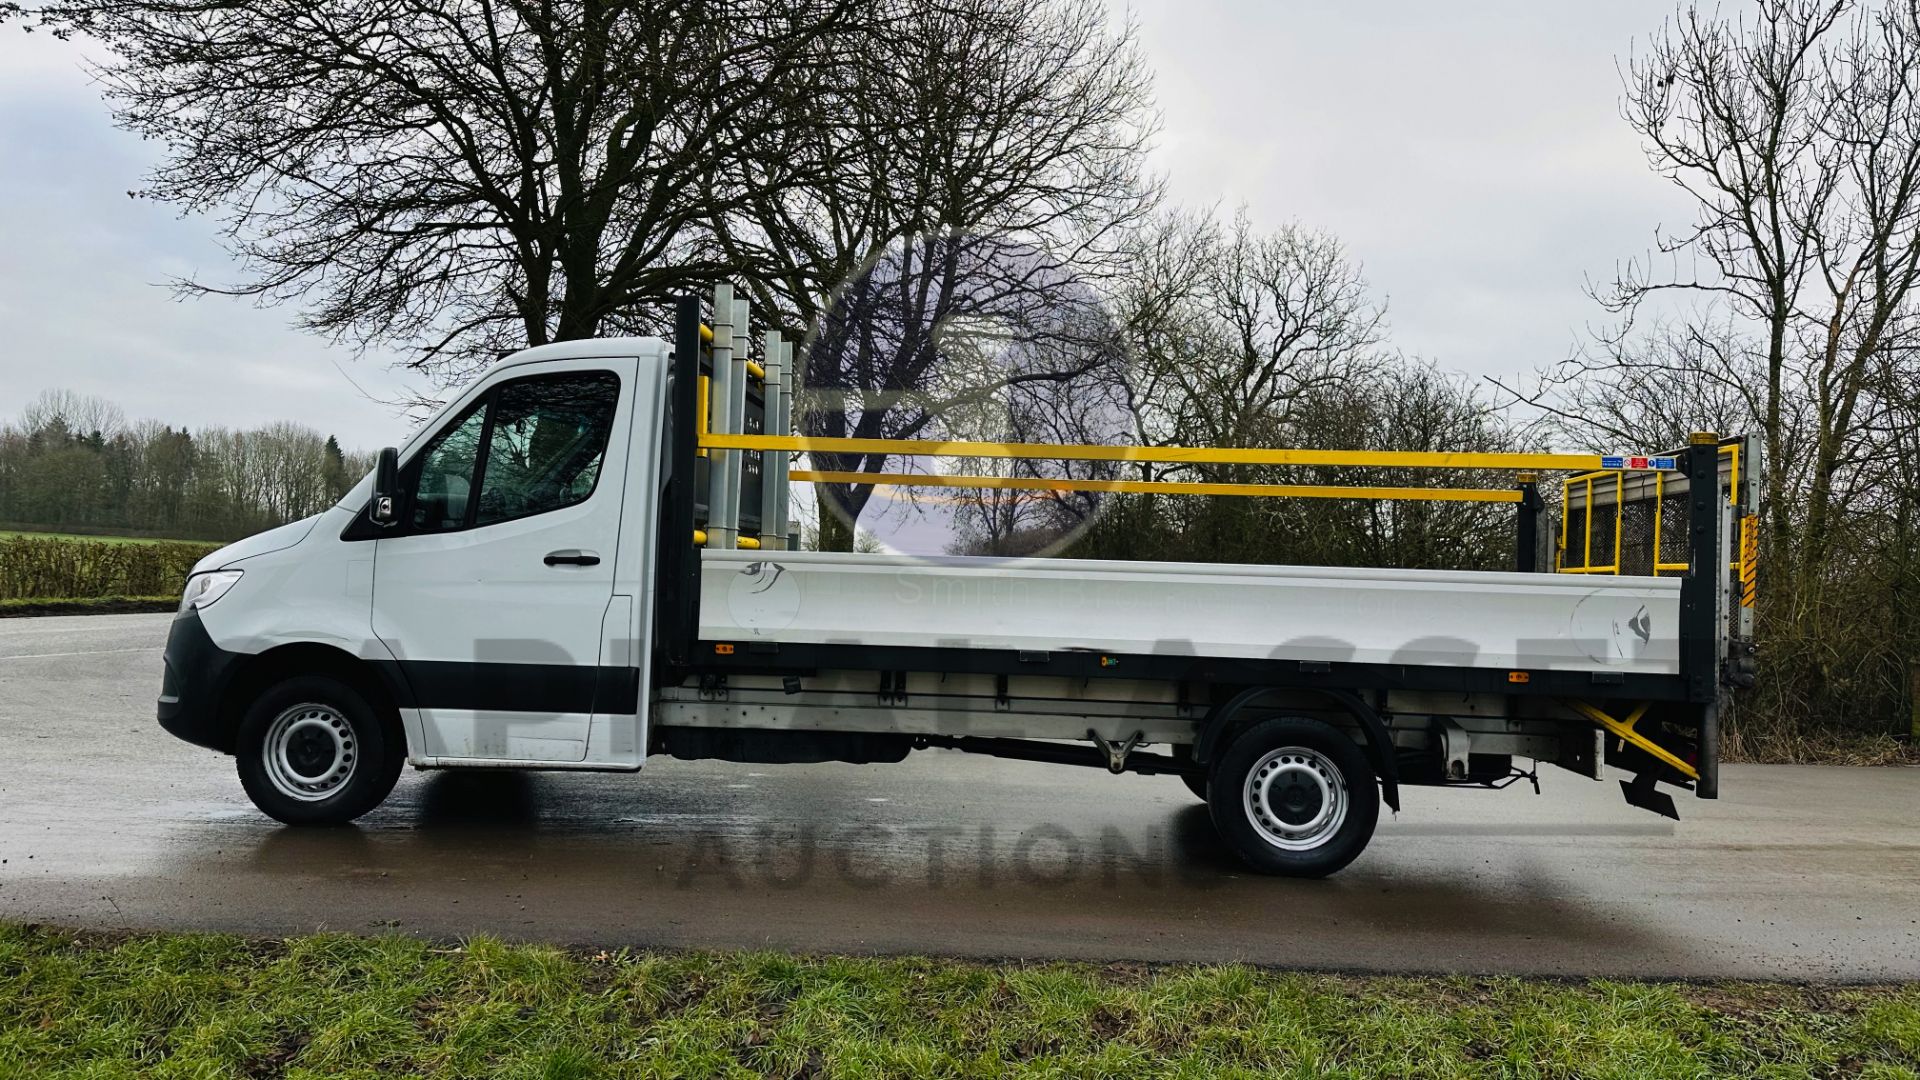 MERCEDES-BENZ SPRINTER 314 CDI *LWB - DROPSIDE* (2019 - EURO 6) AUTOMATIC *TAIL-LIFT* (3500 KG) - Image 8 of 40